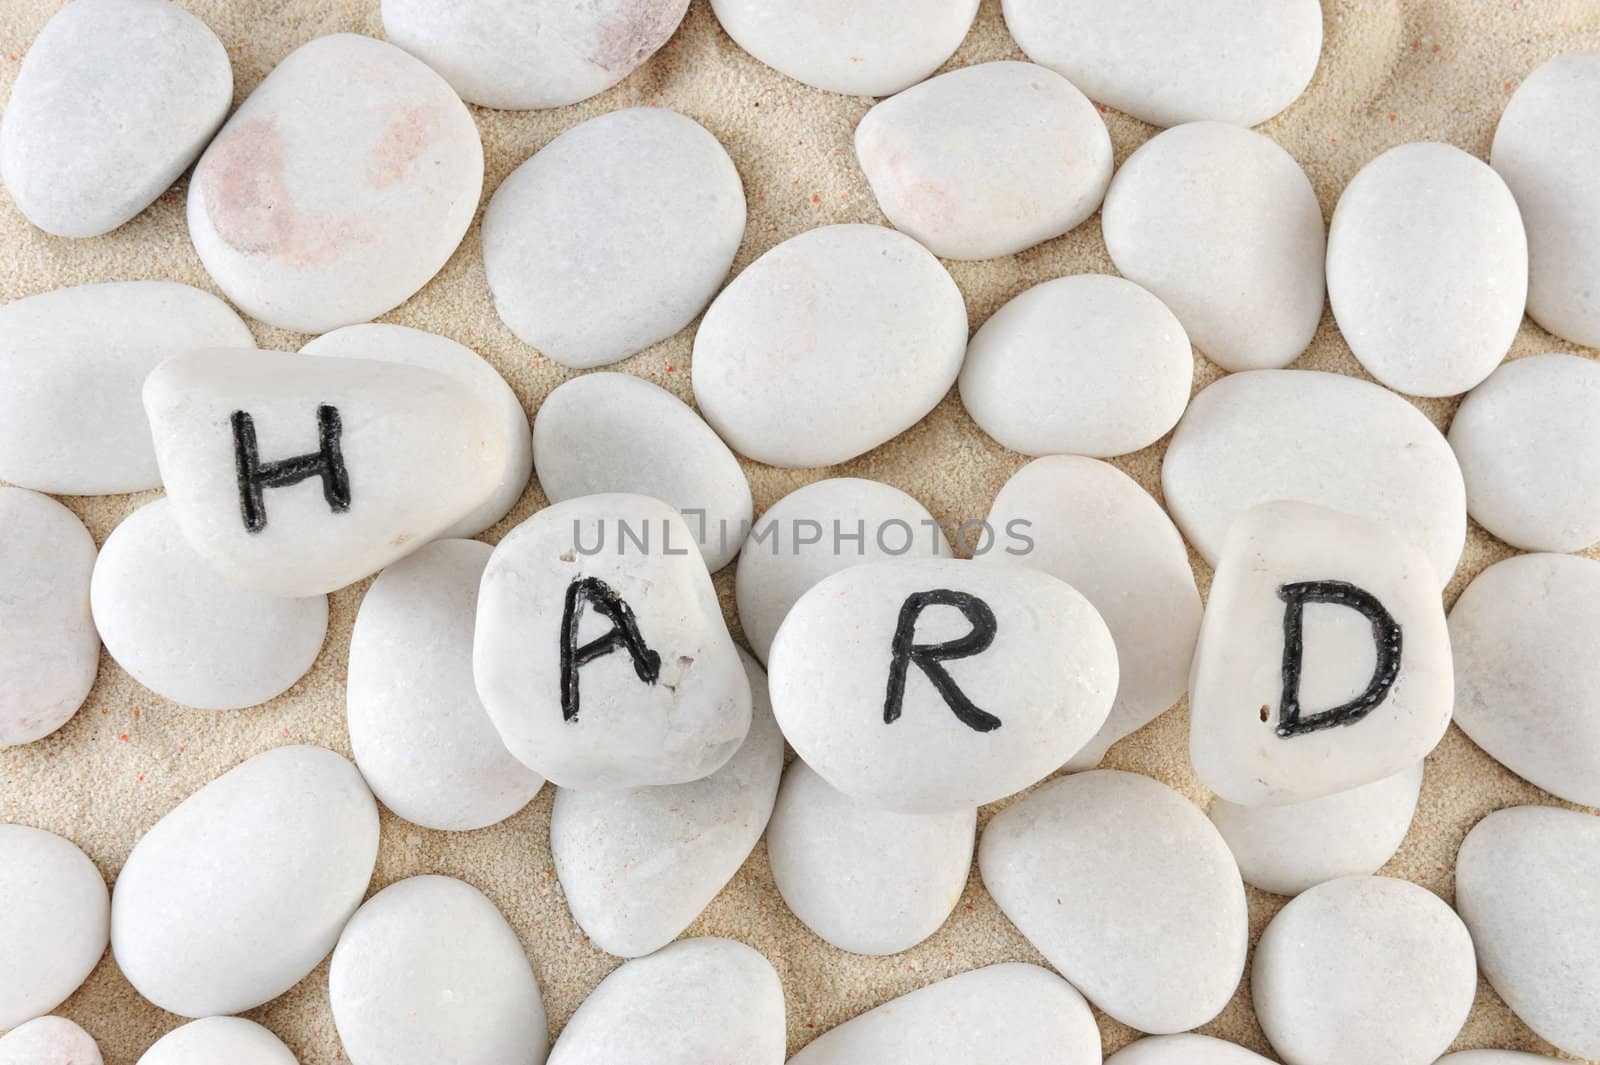 Hard word among group of stones on the sand